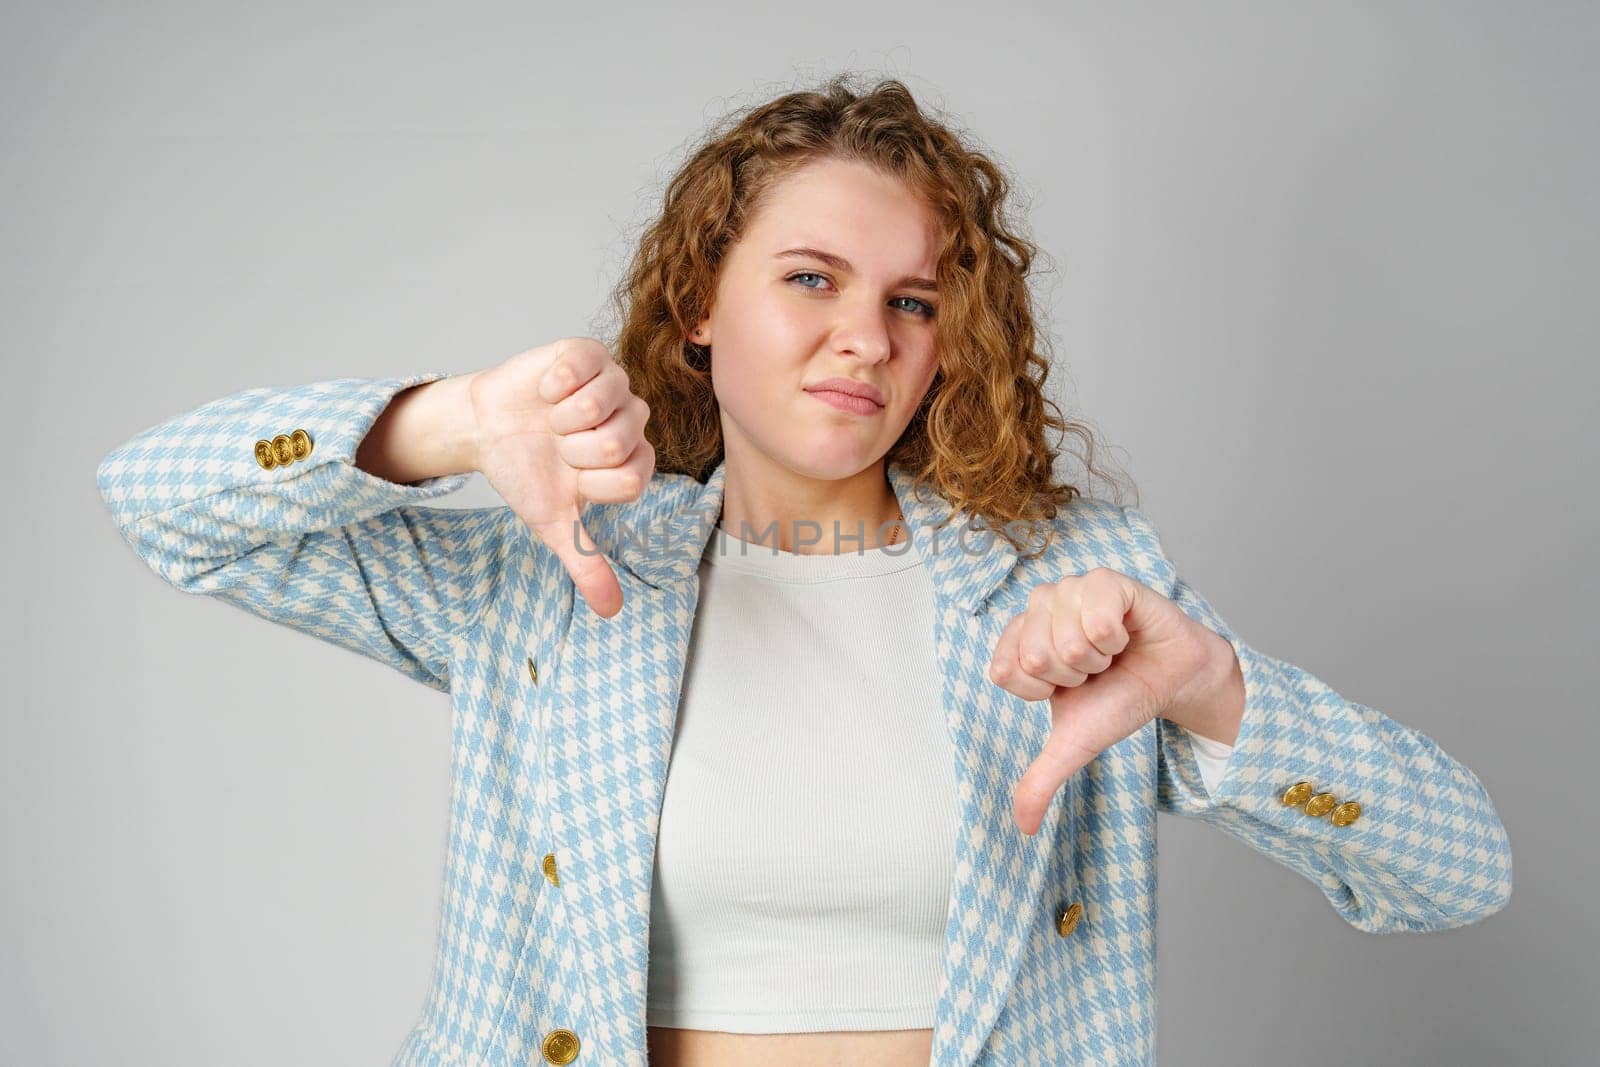 Woman With Curly Hair Giving a Thumbs Down in Studio